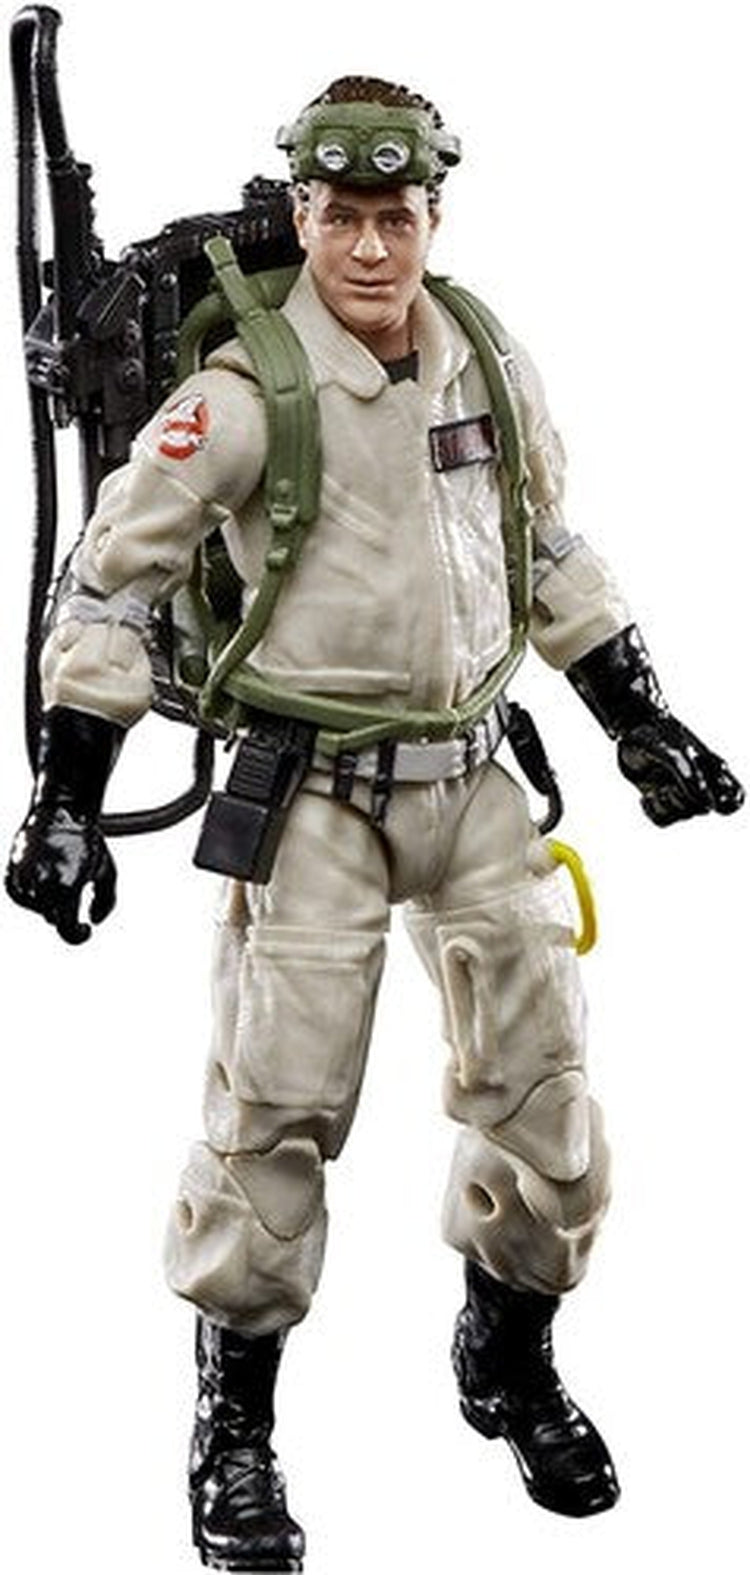 Hasbro Collectibles - Ghostbusters Plasma Series Ray Stantz Action Figure